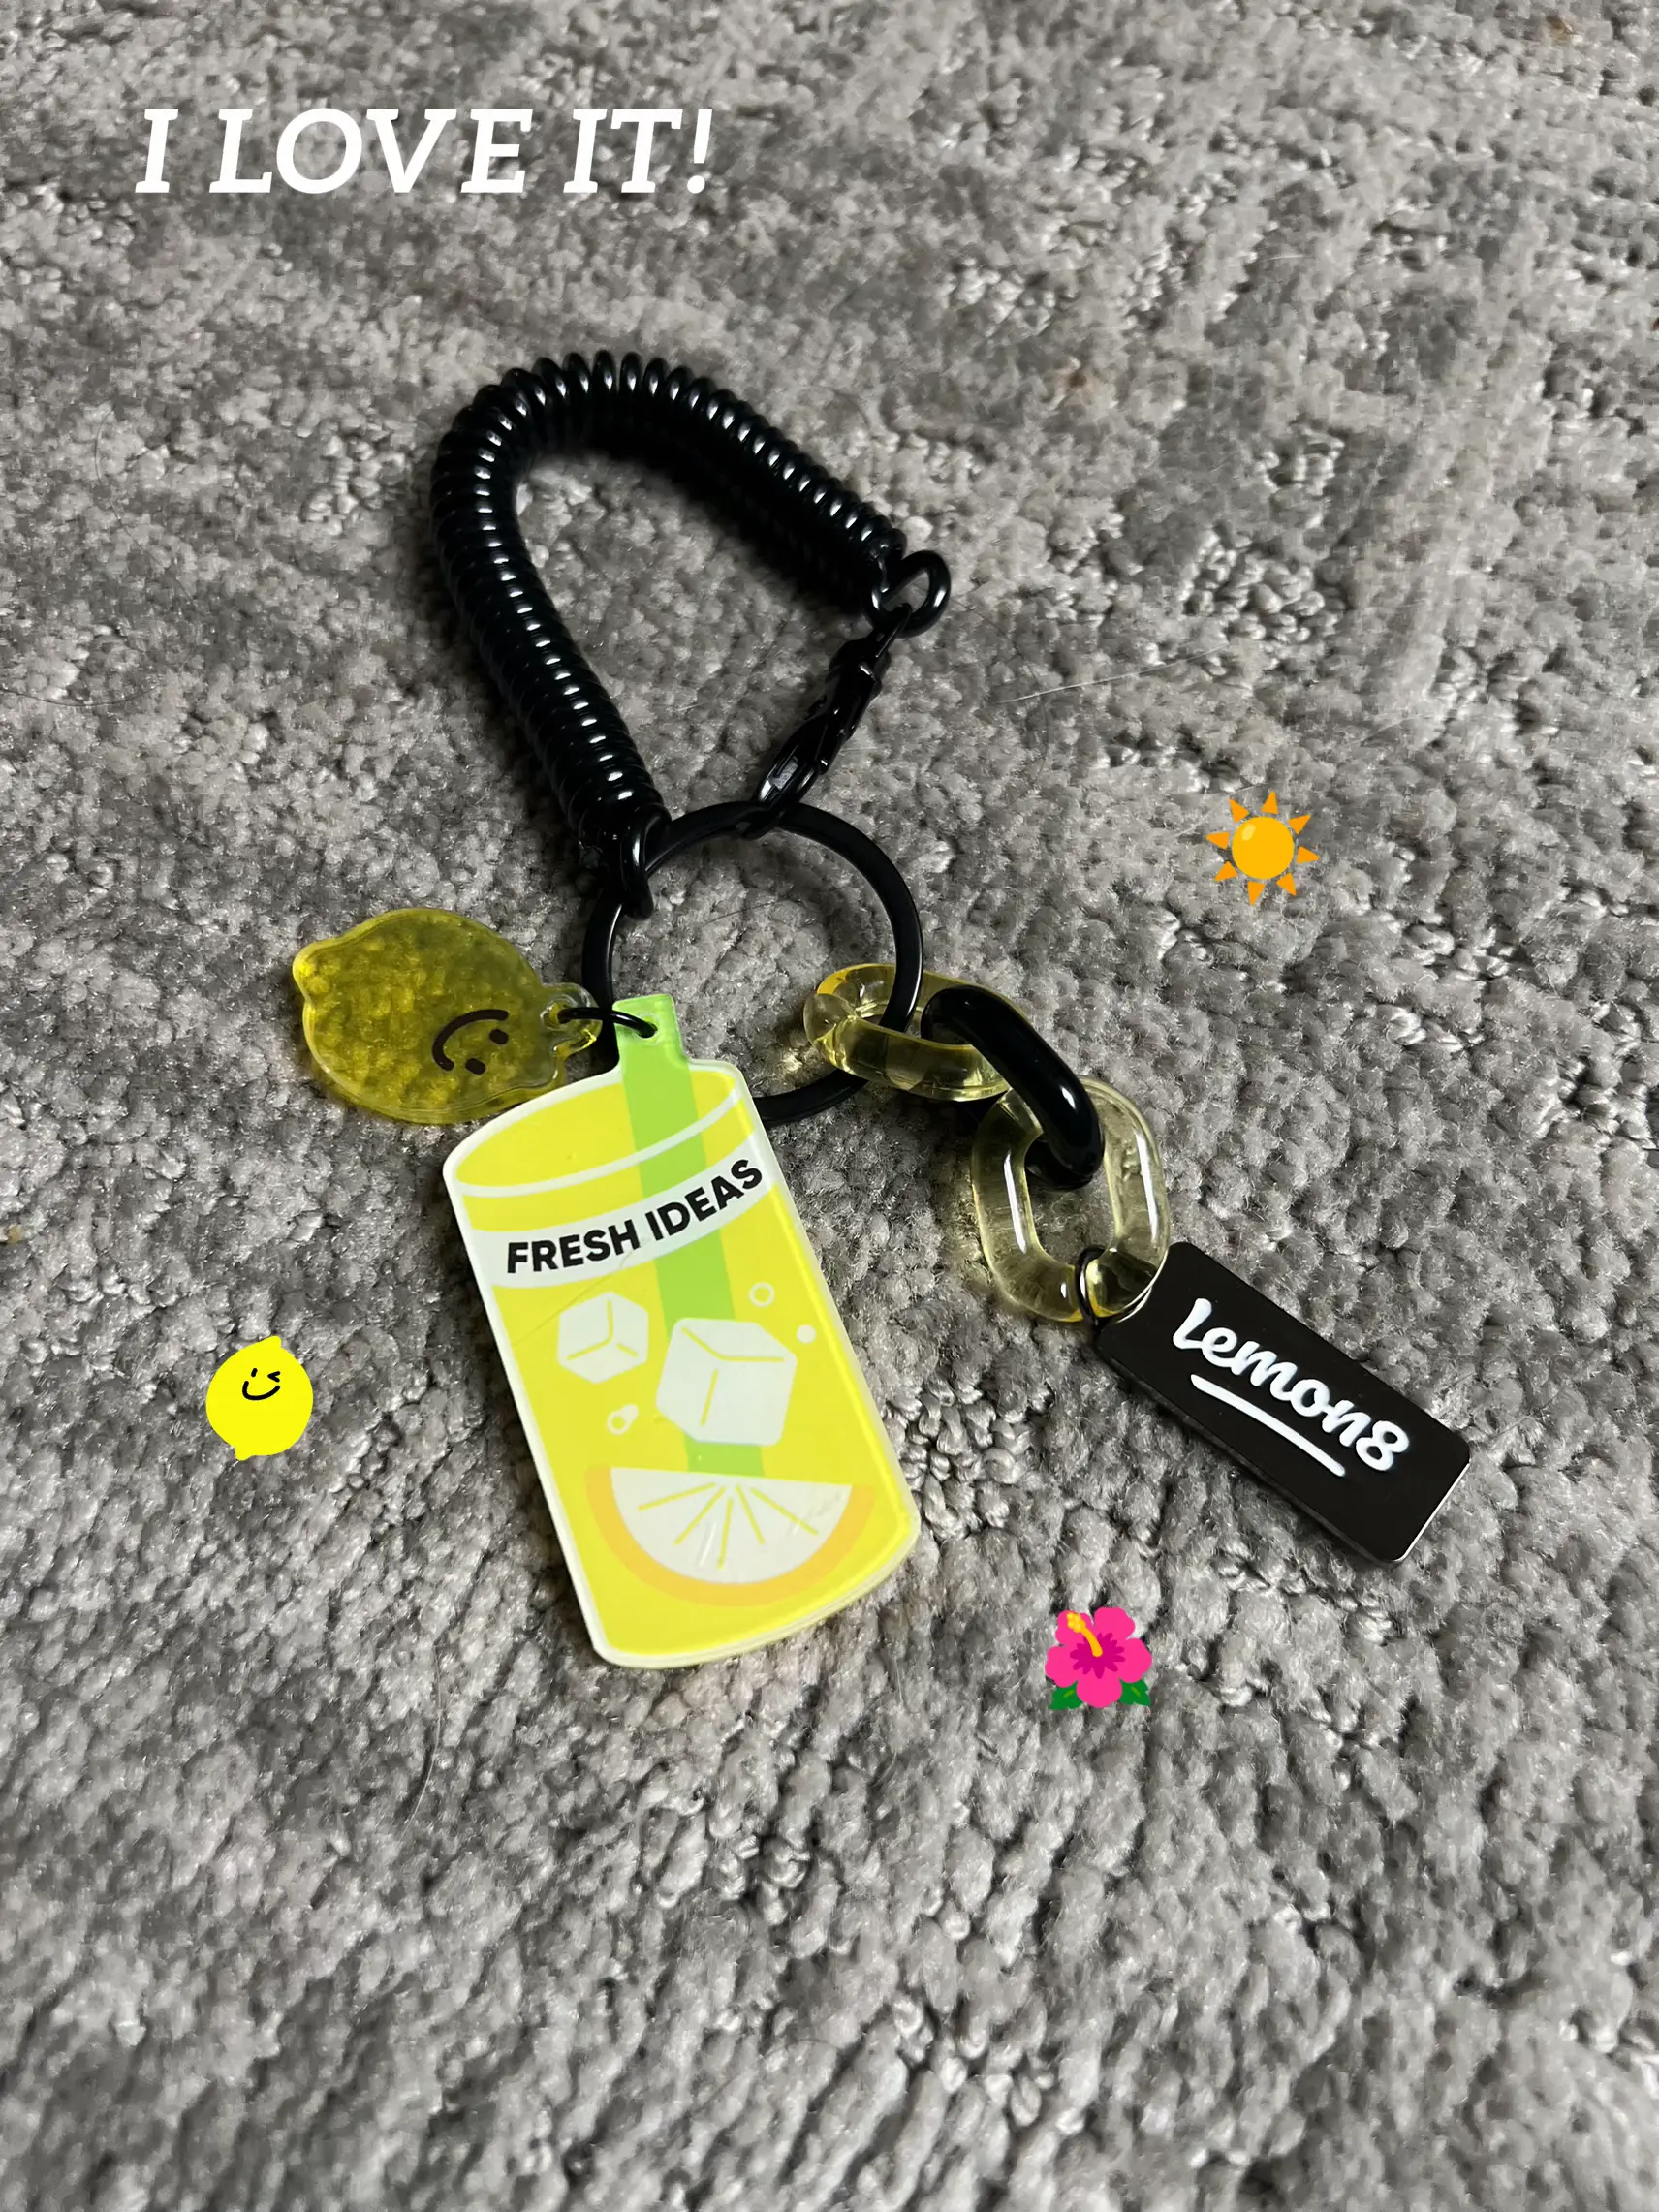  A keychain with a lemon on it and the words "I love it!" written on top.